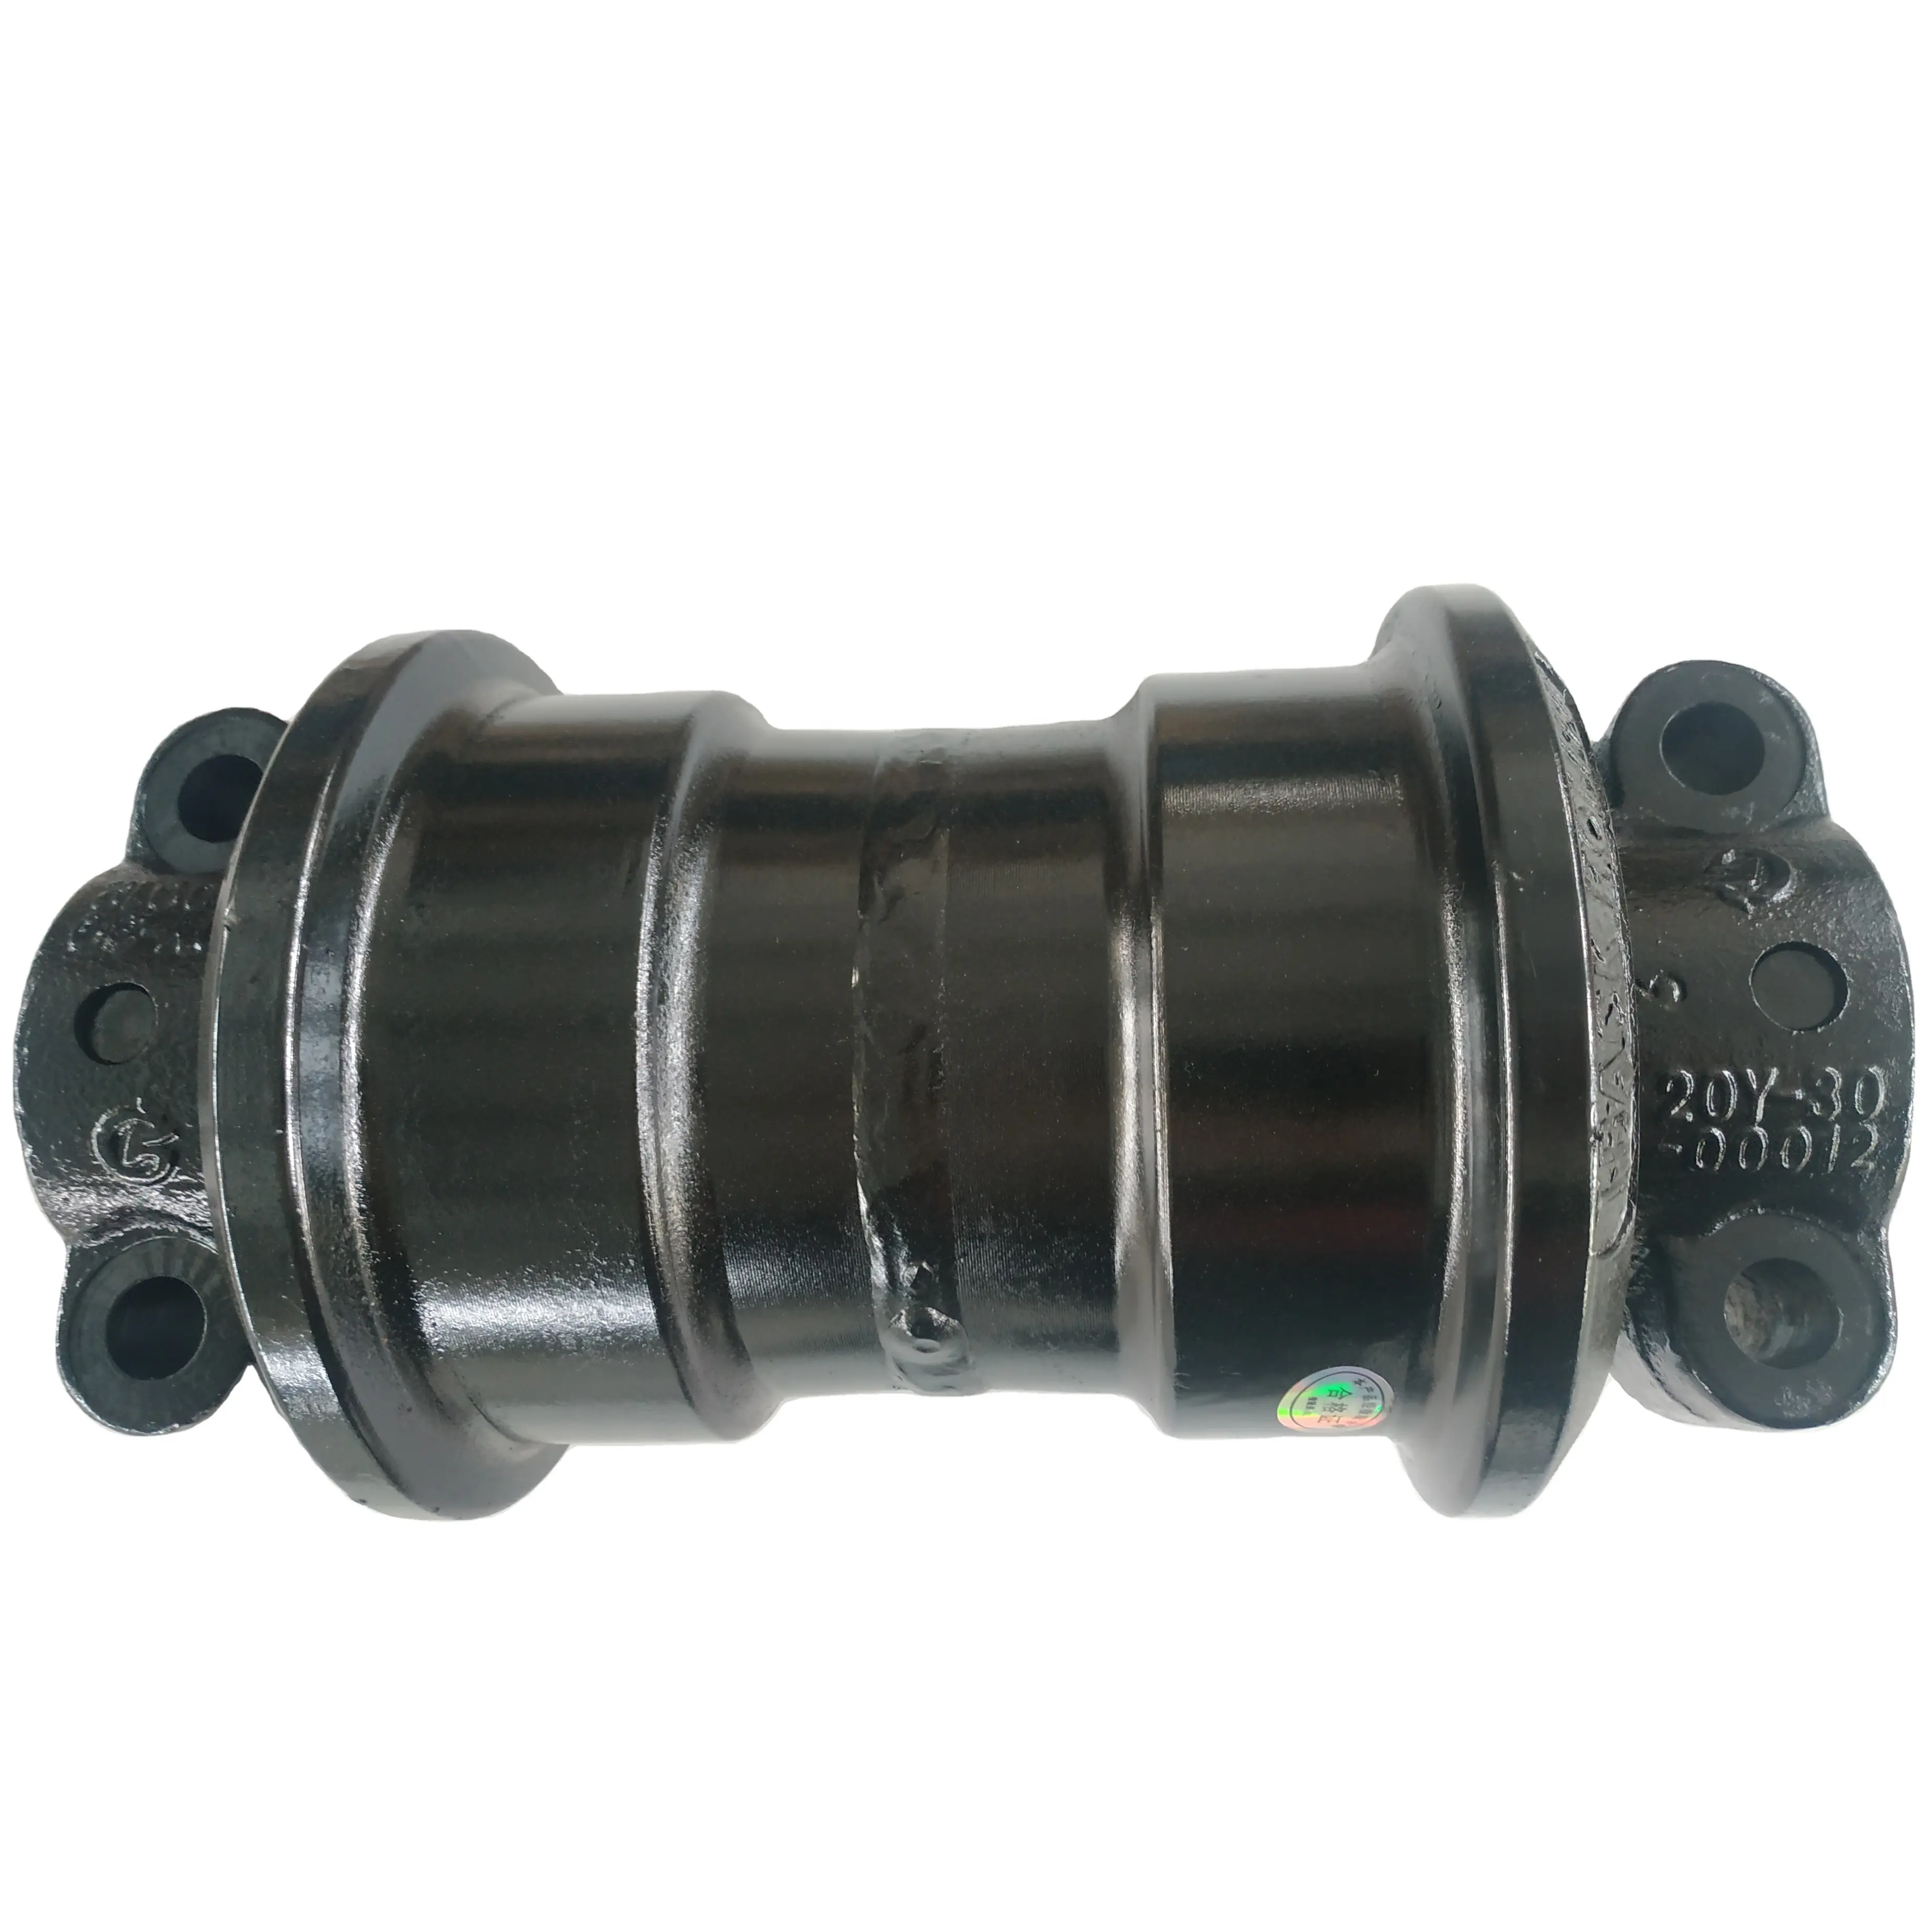 One New Single-Flange Roller Group D31 Replaces Part Number 113-30-00170